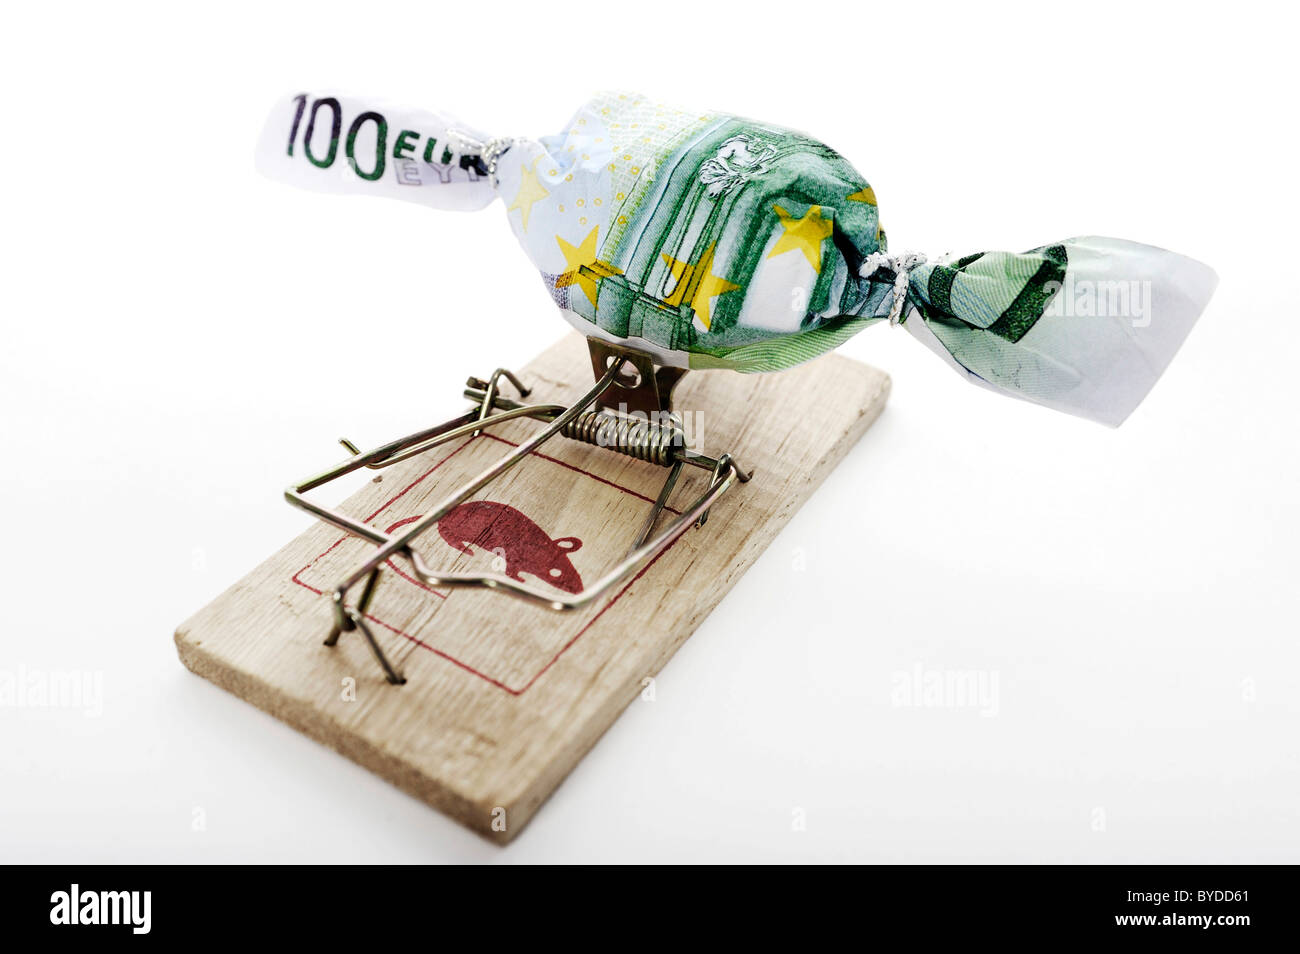 Hard candy wrapped in a banknote on a mousetrap, symbolic image for debt trap Stock Photo